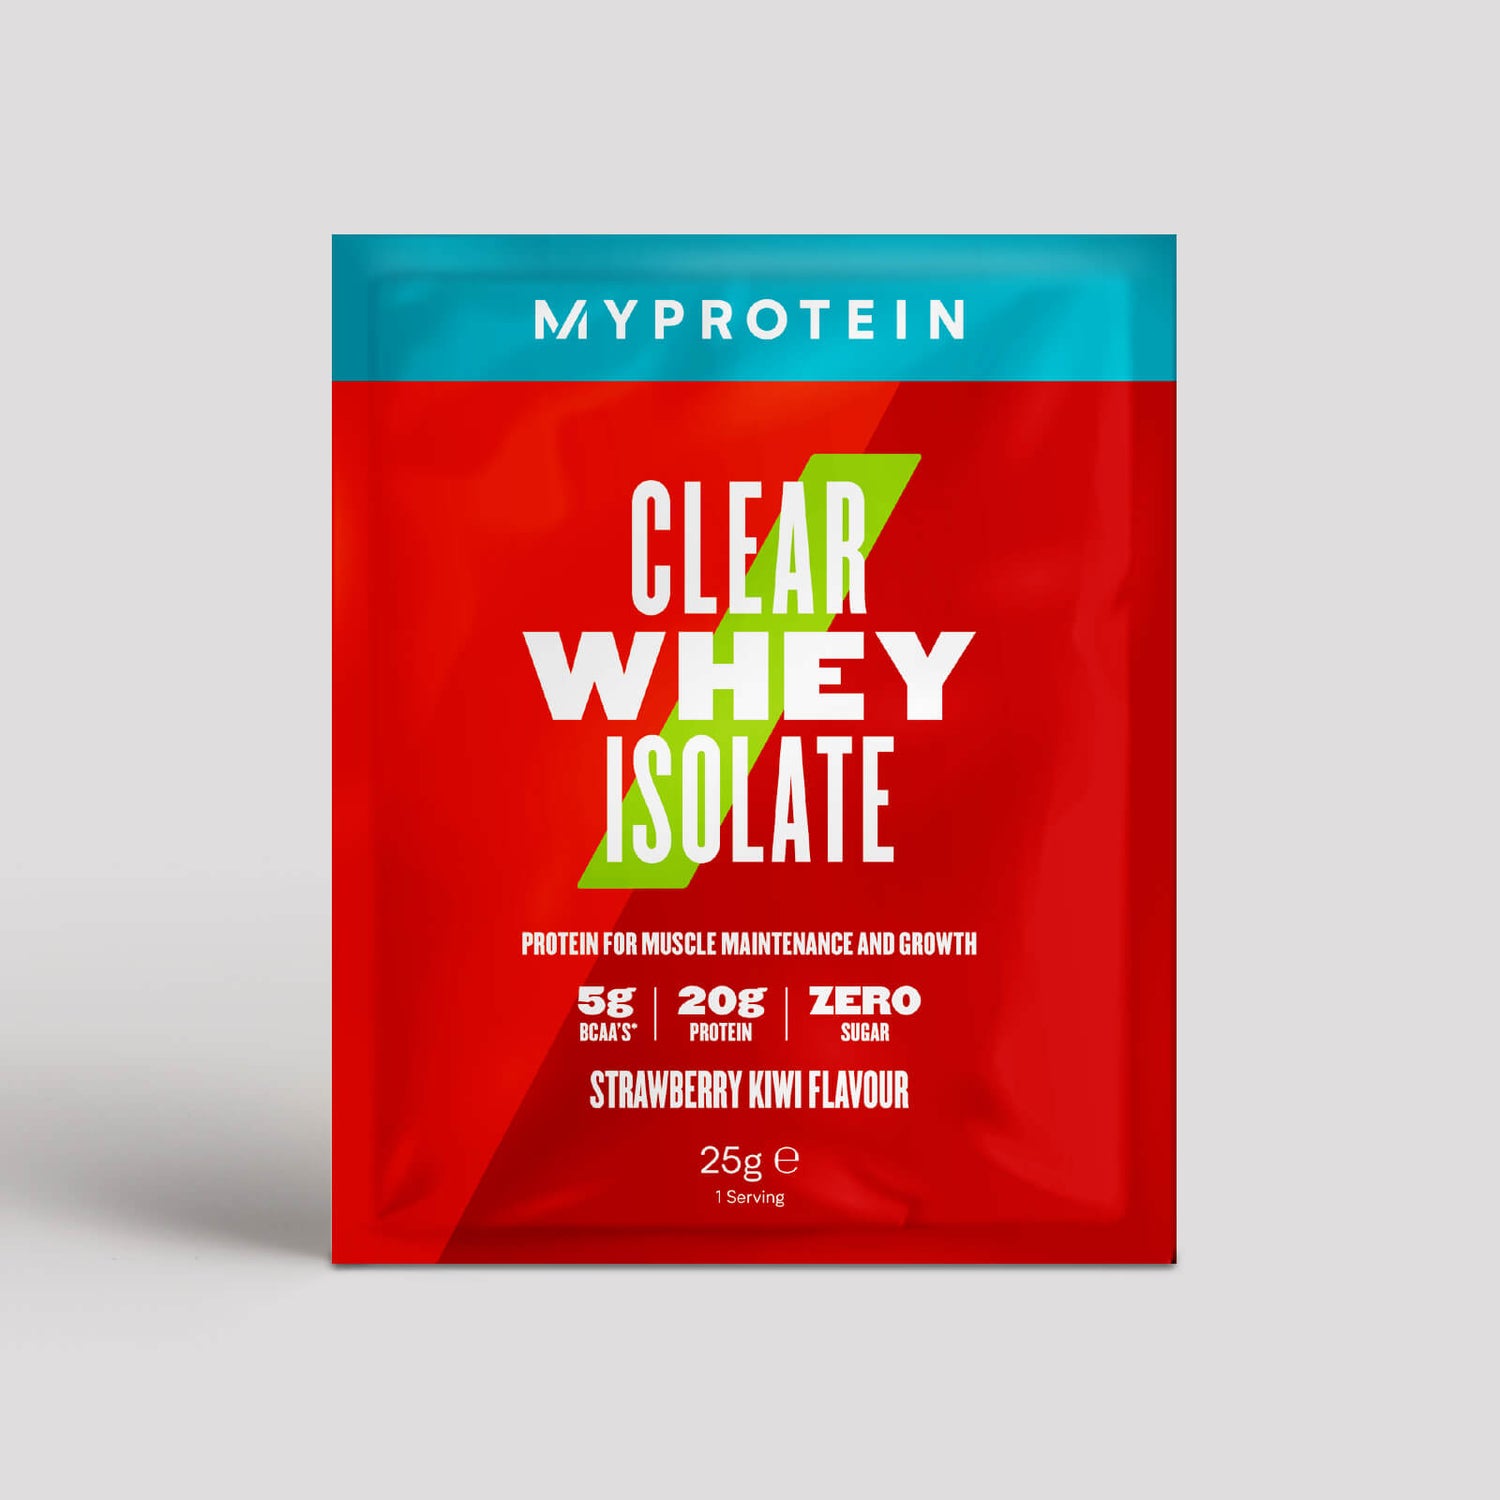 Myprotein Clear Whey Isolate (Sample) - 1servings - Φράουλα Kiwi